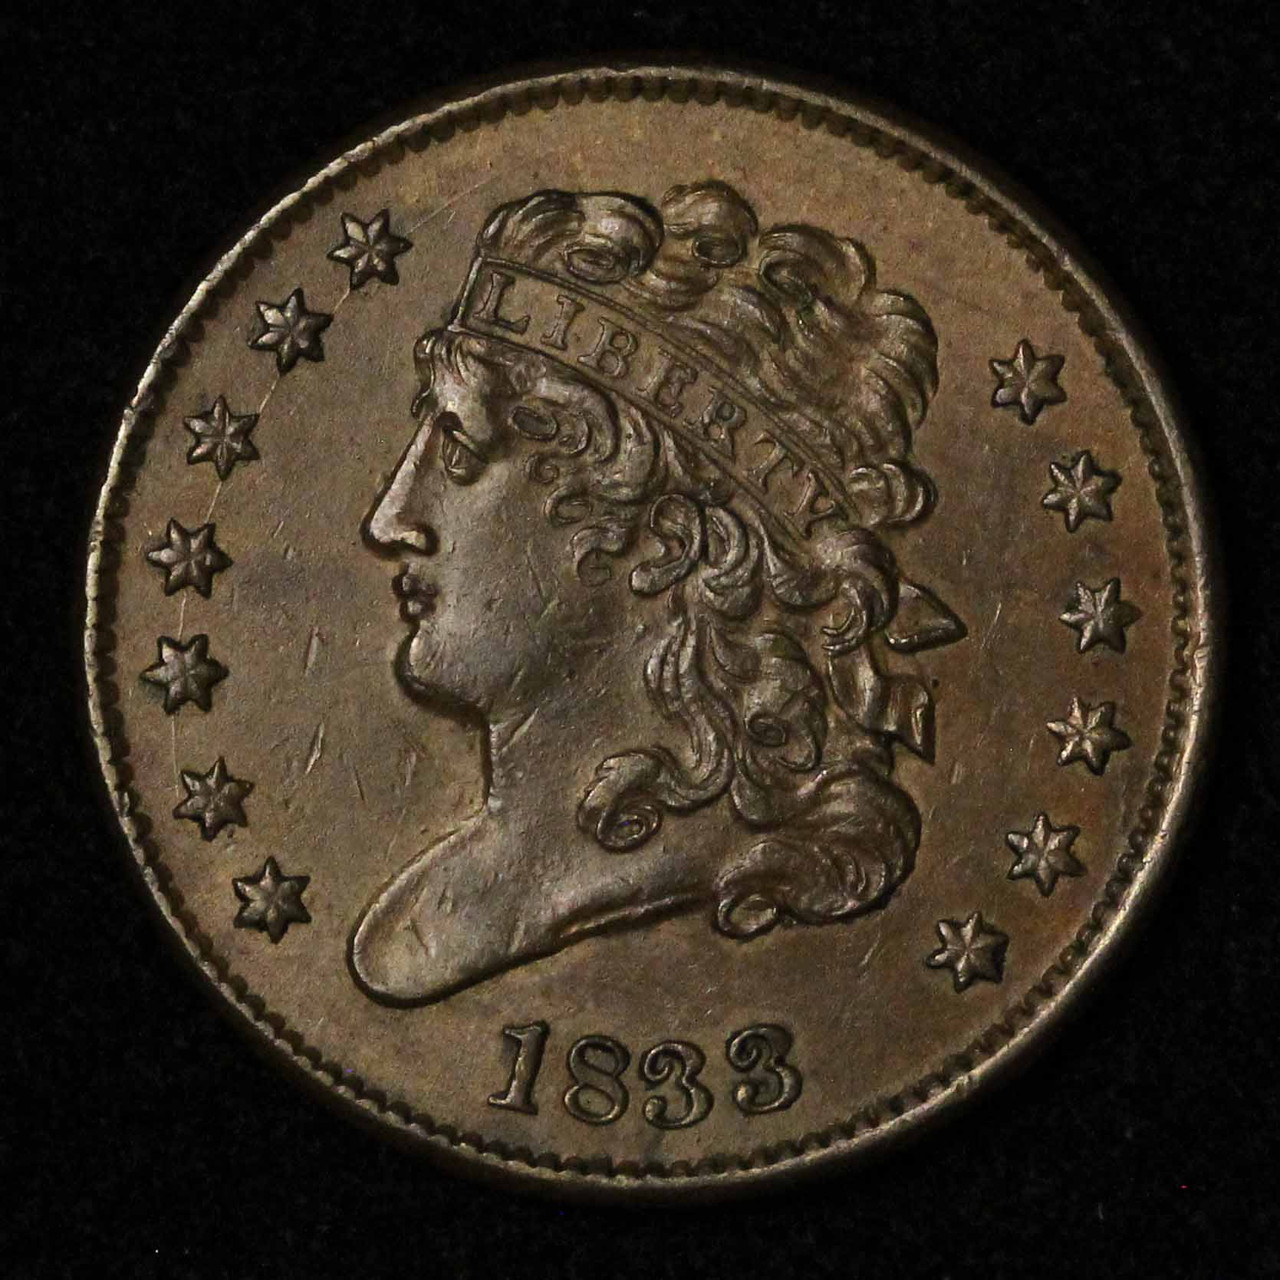 1833 1/2c Classic Head Half Cent - Free Shipping USA - The Happy Coin